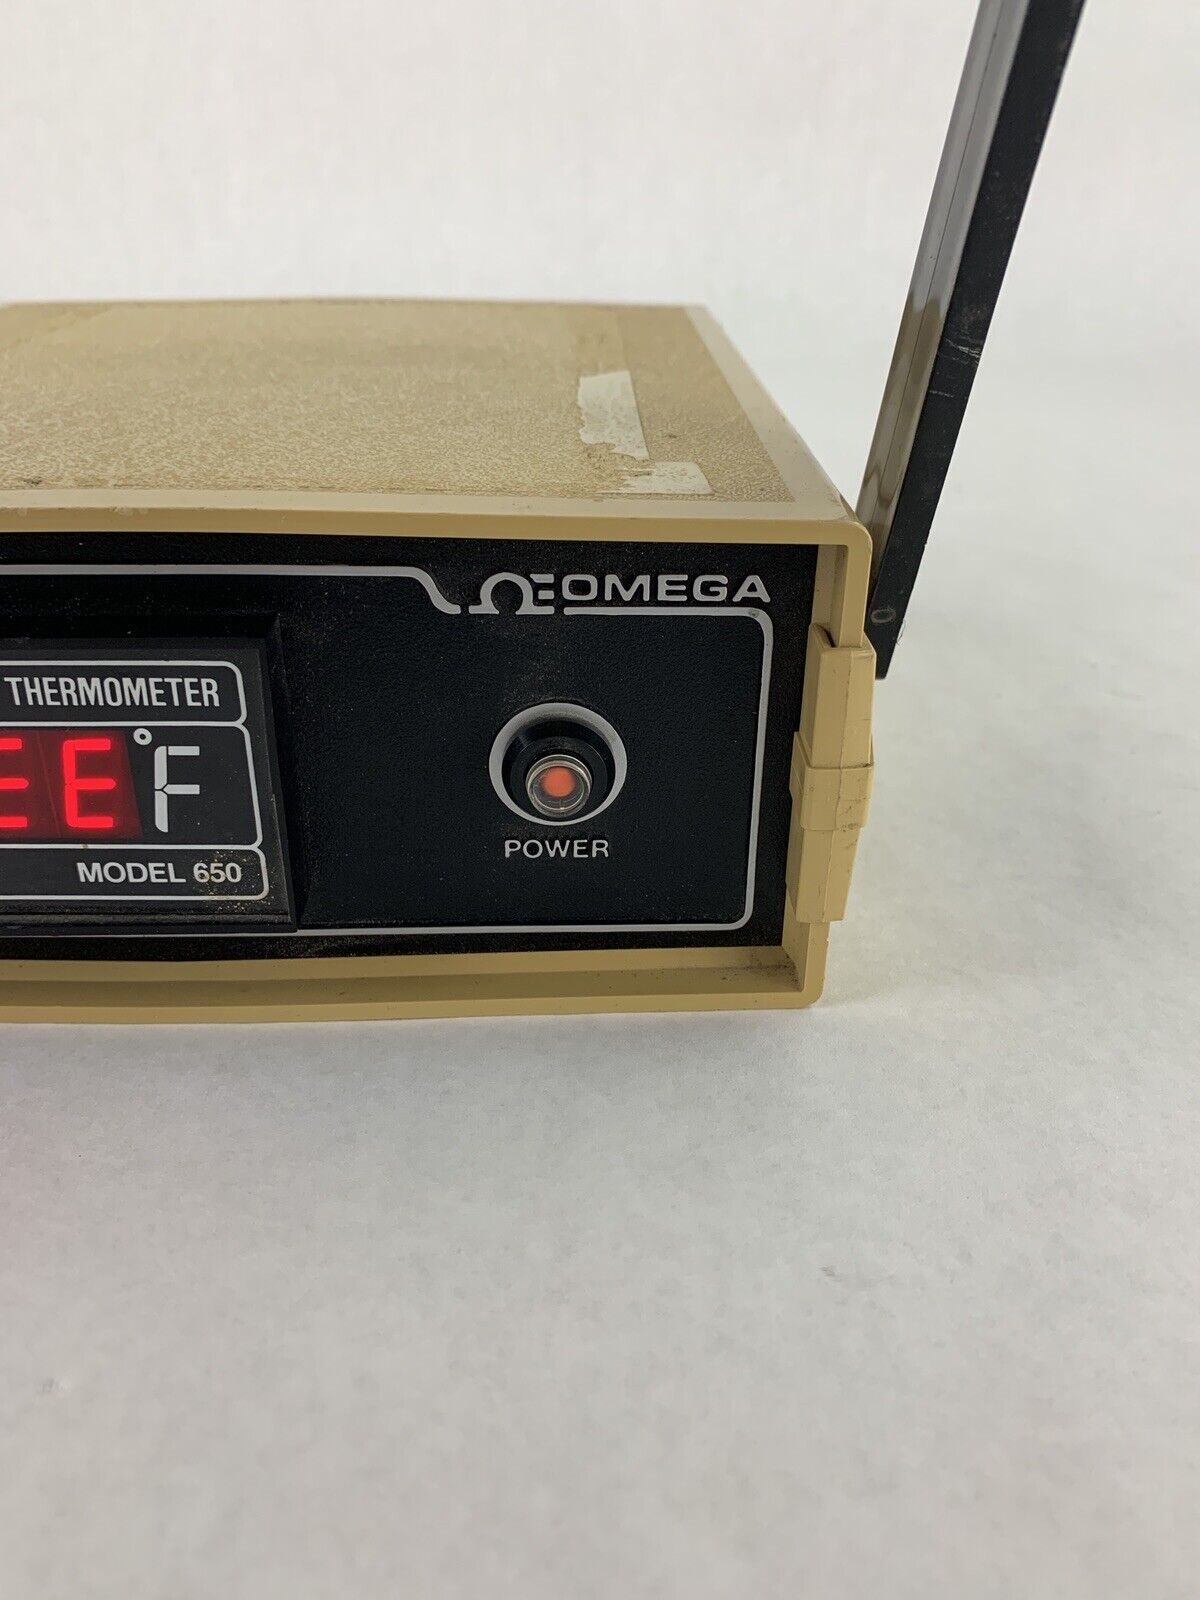 Omega Model 650 Type J Thermocouple Thermometer Power Tested